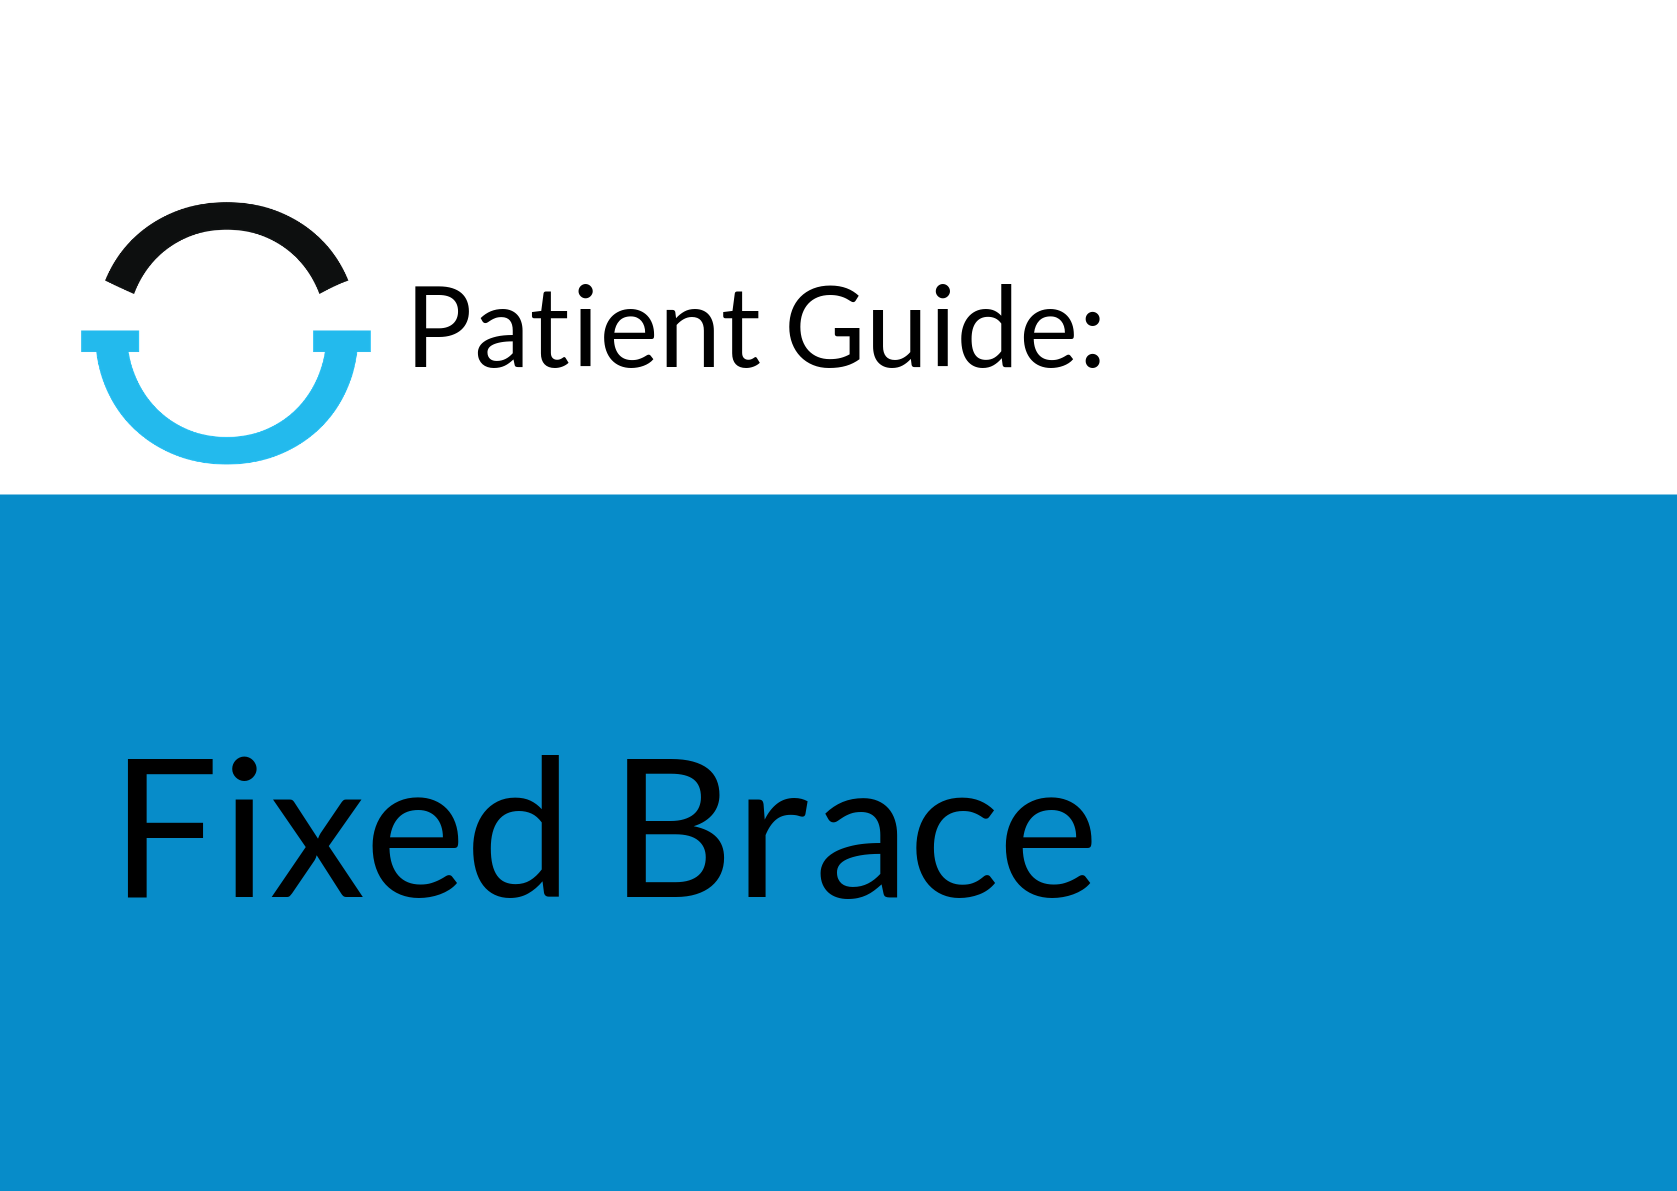 Patient Guide Header Image – Fixed Brace LARGE